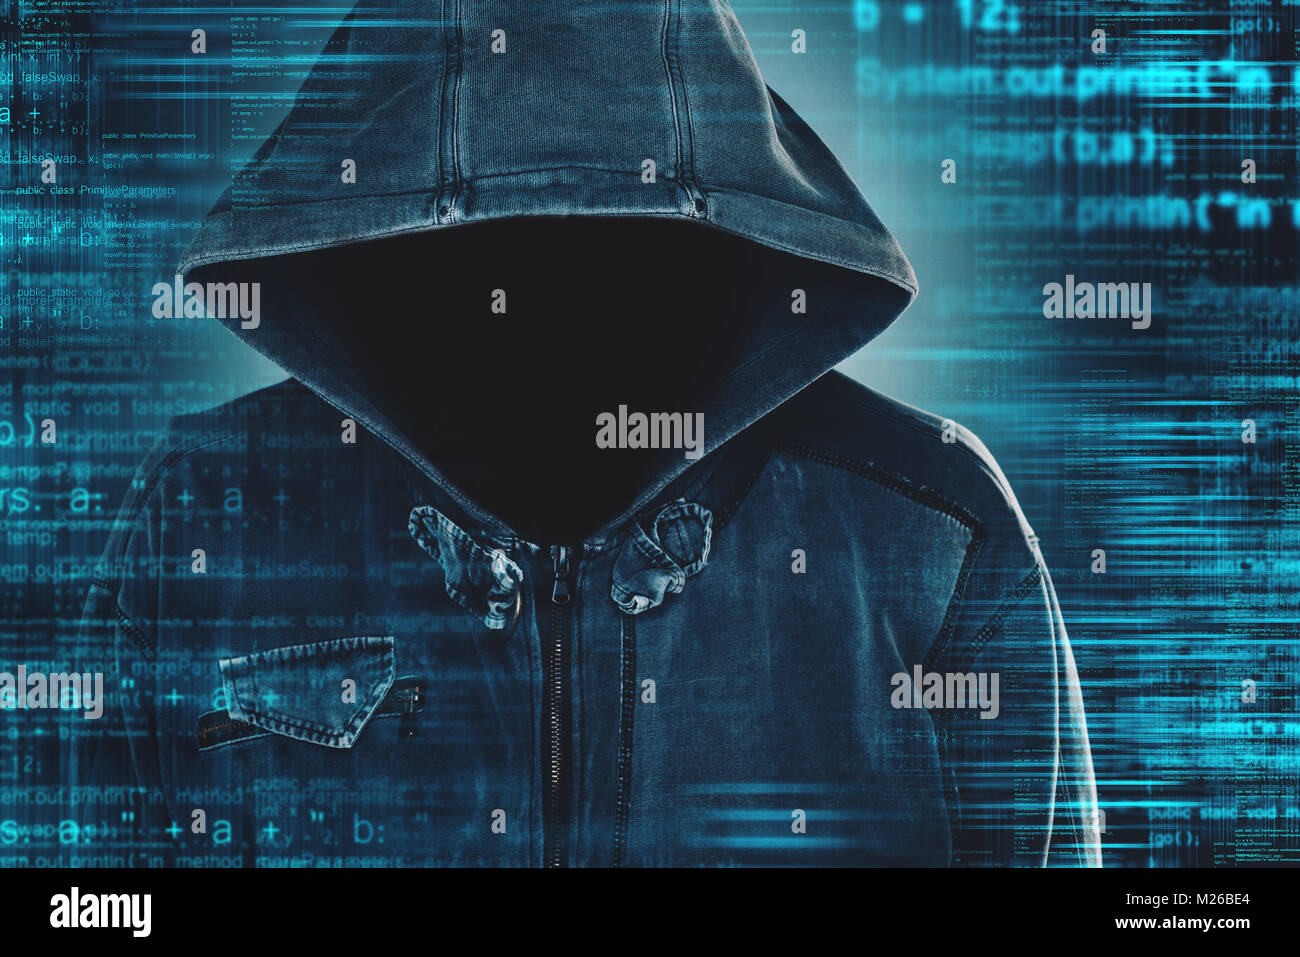 Cybersecurity, computer hacker with hoodie and obscured face, computer code overlaying image Stock Photo